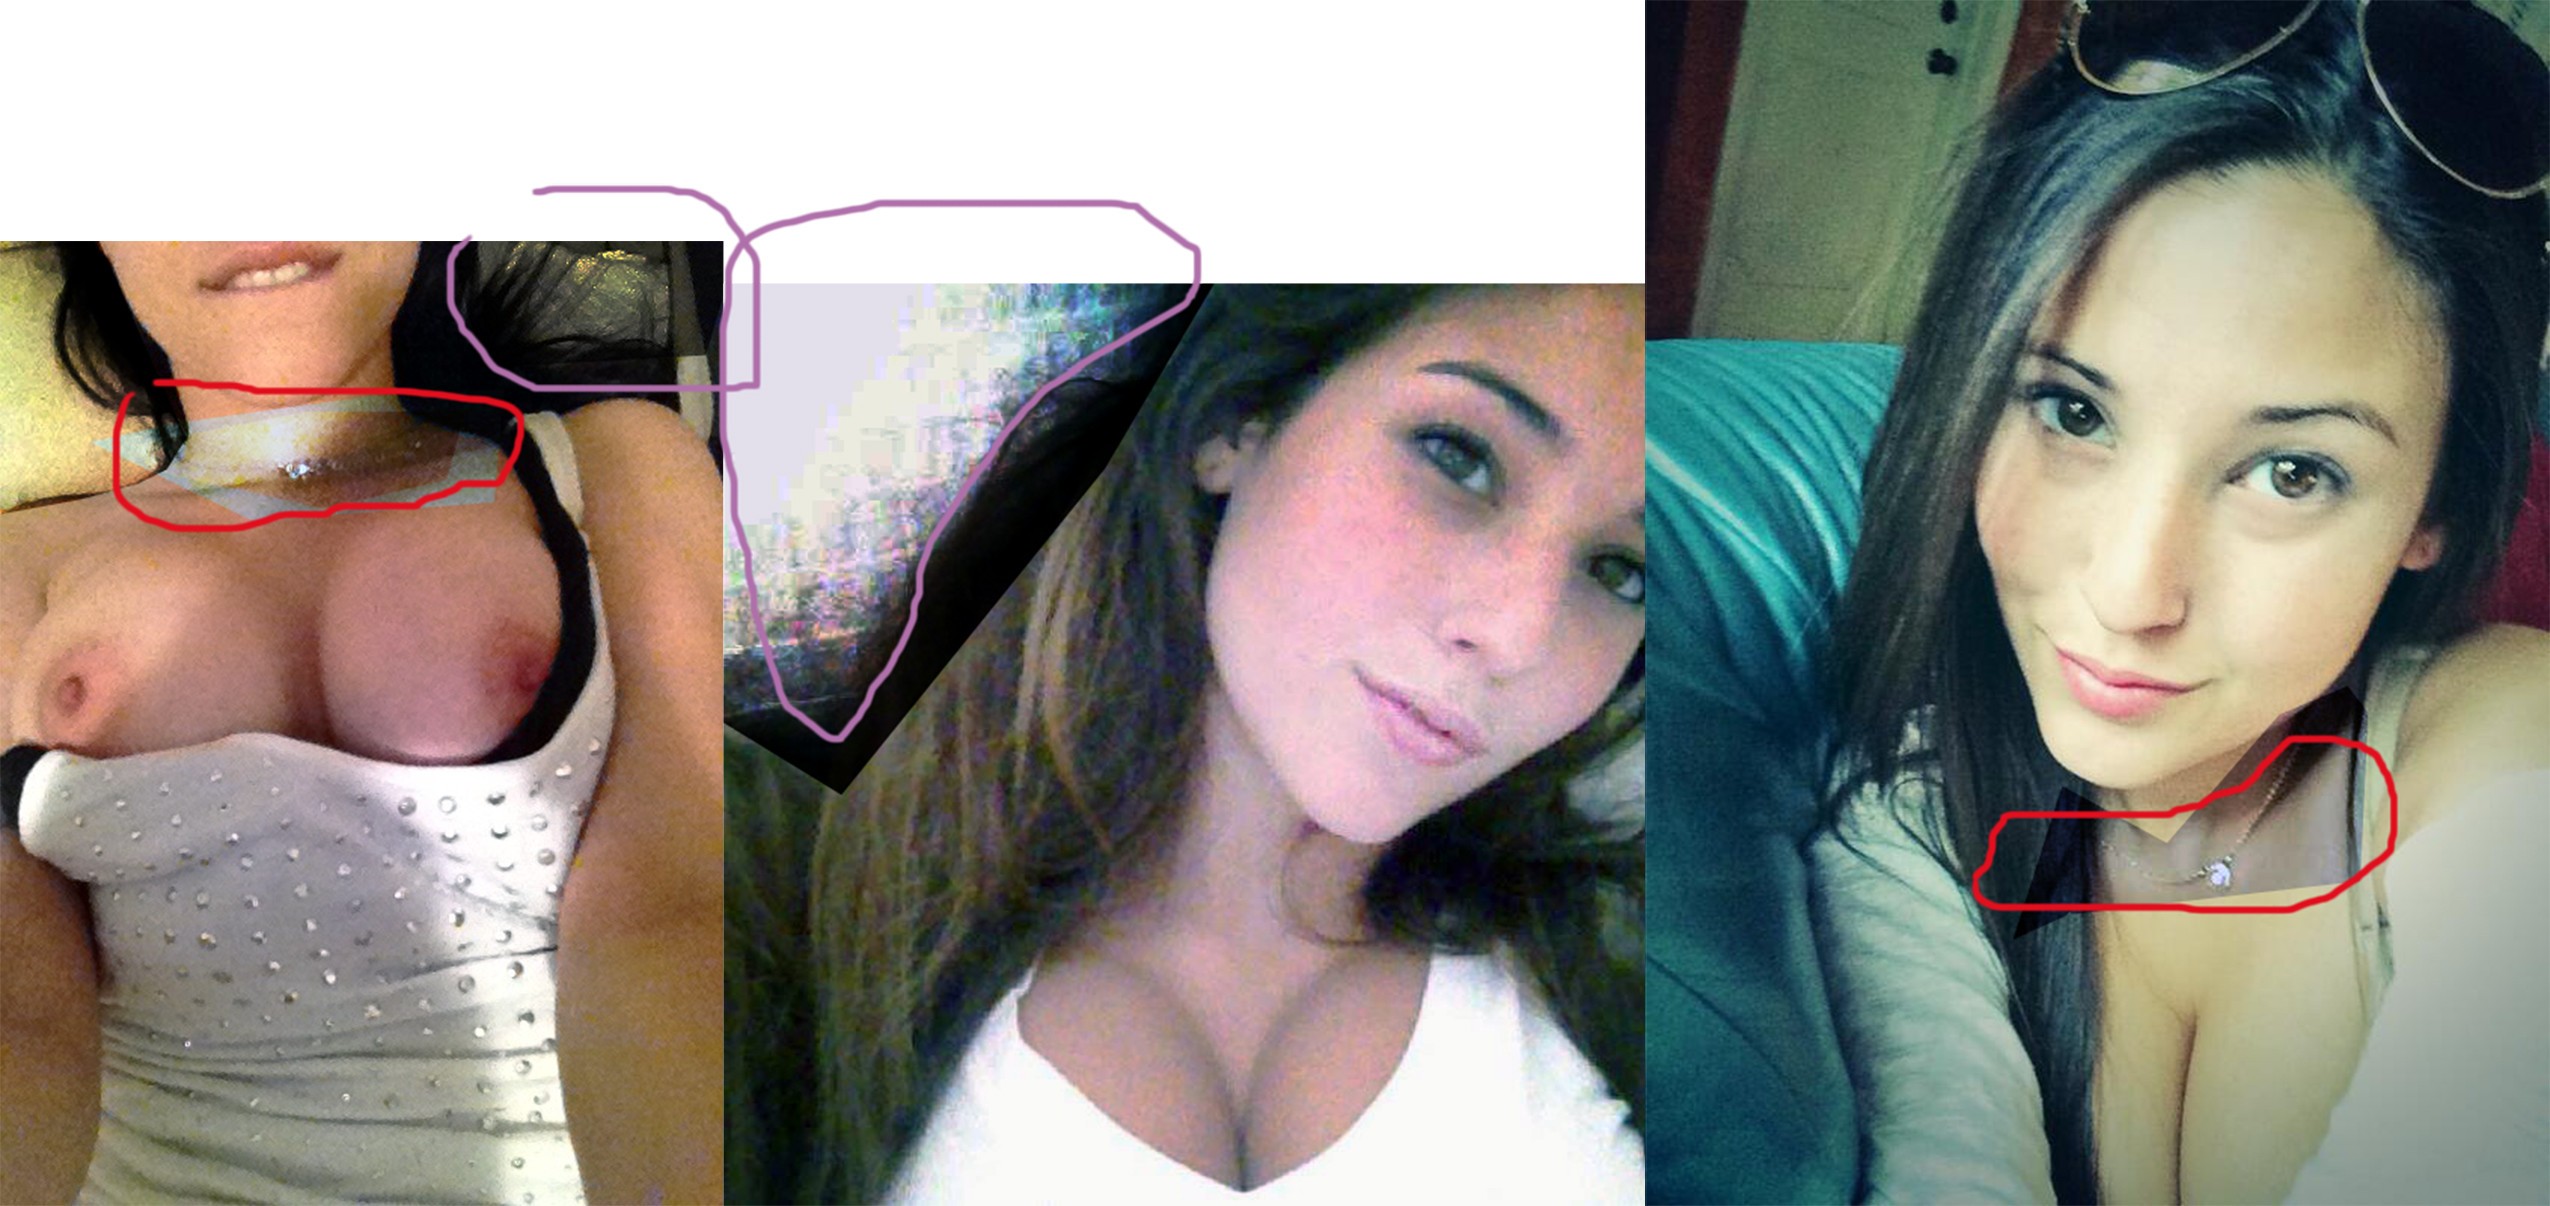 Angie Varona Pocahontas sex tape and nude naked photo leaks online, Angelin...